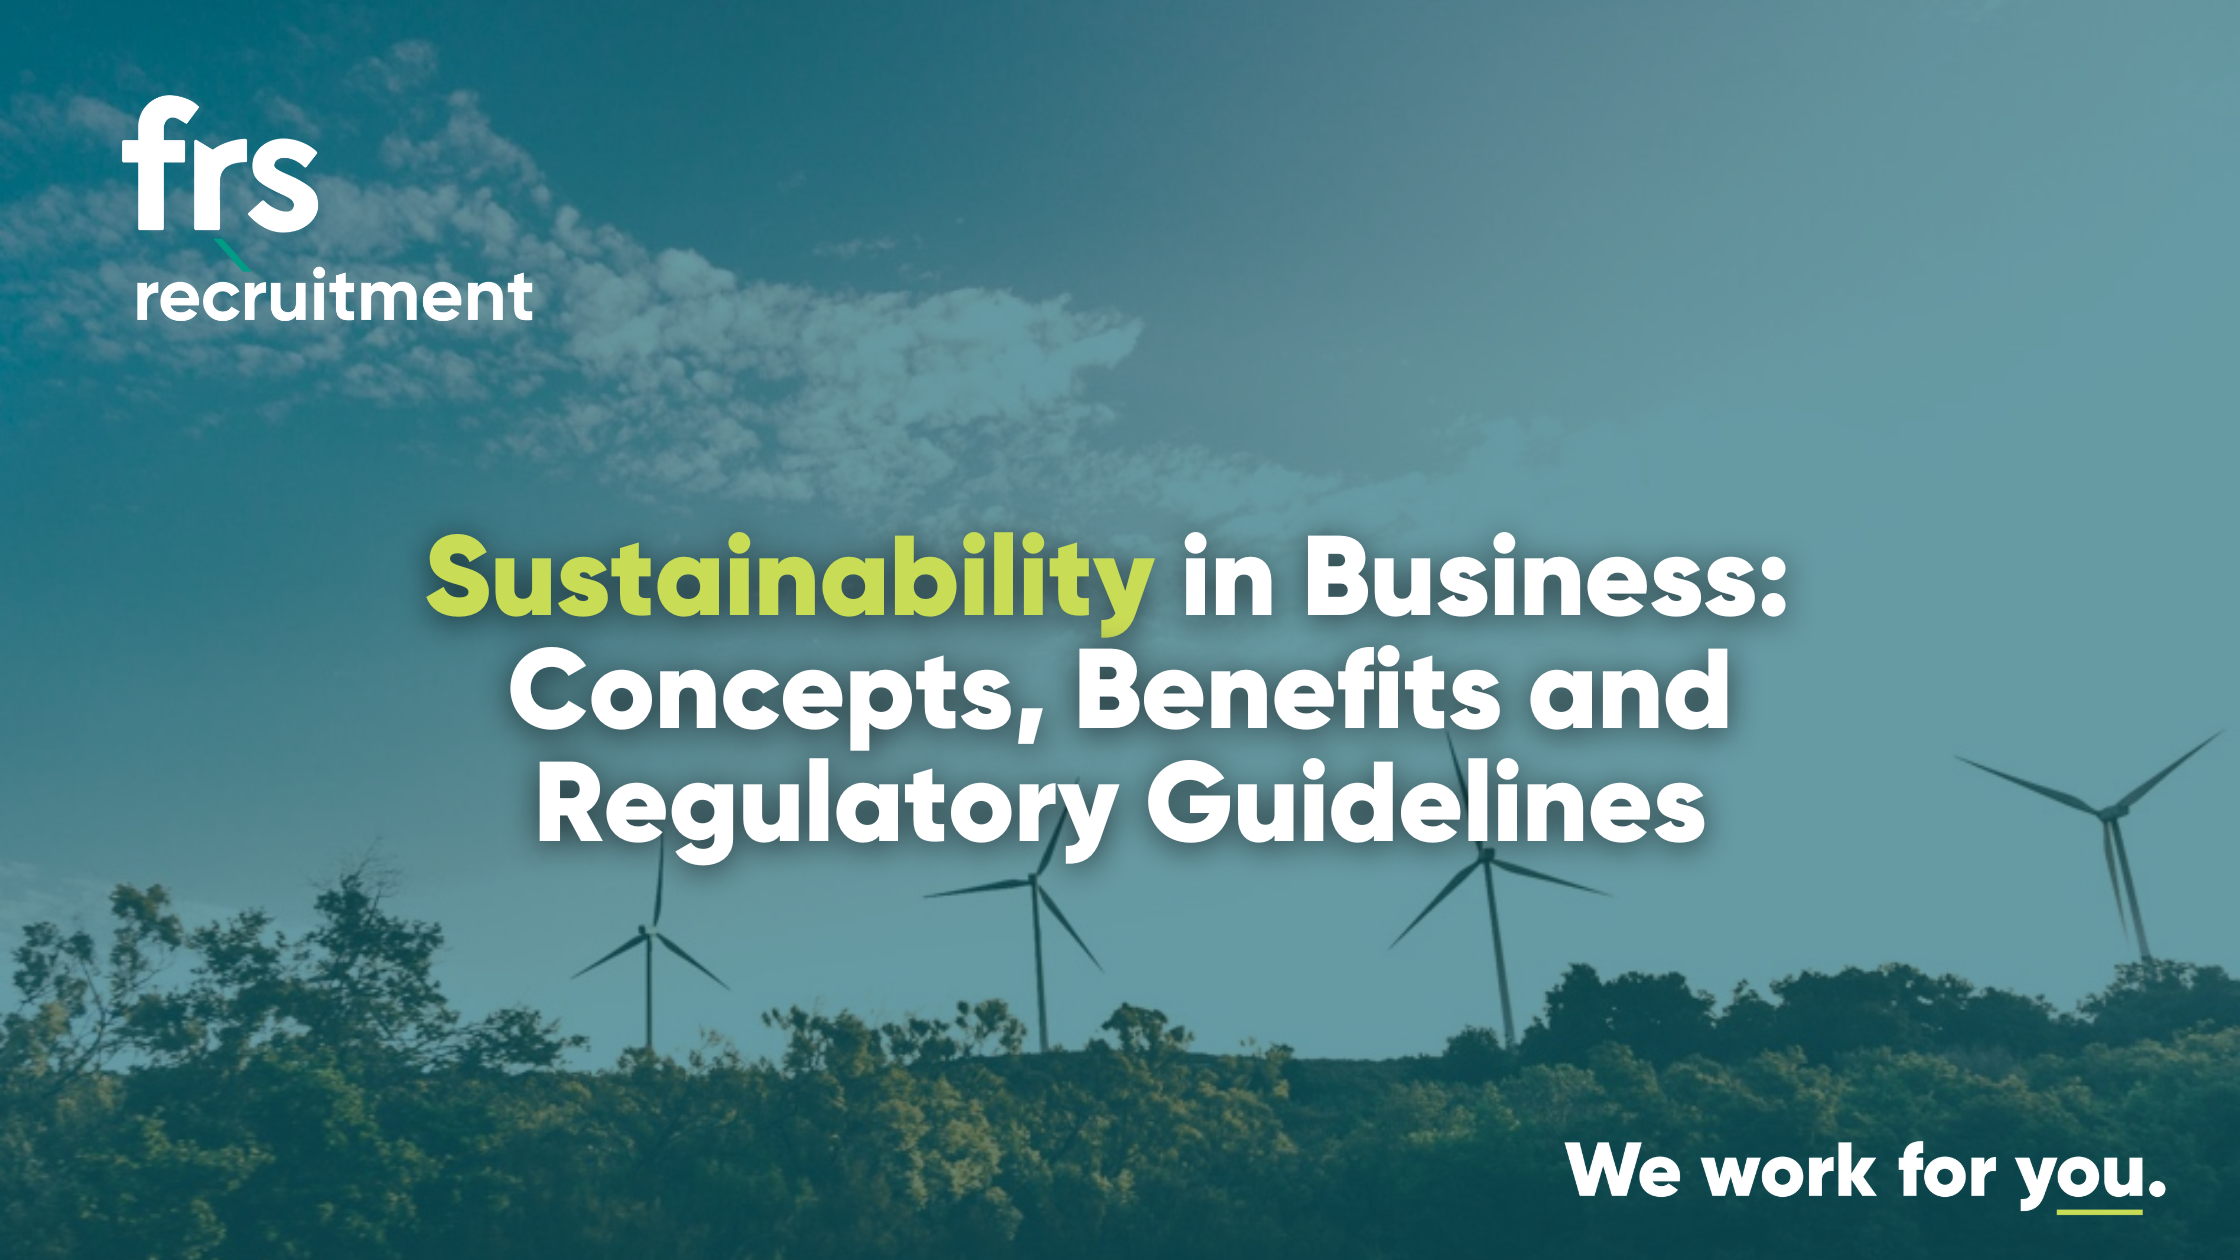 An Essential Guide to Sustainability in Business: Concepts, Benefits, and Regulatory Guidelines